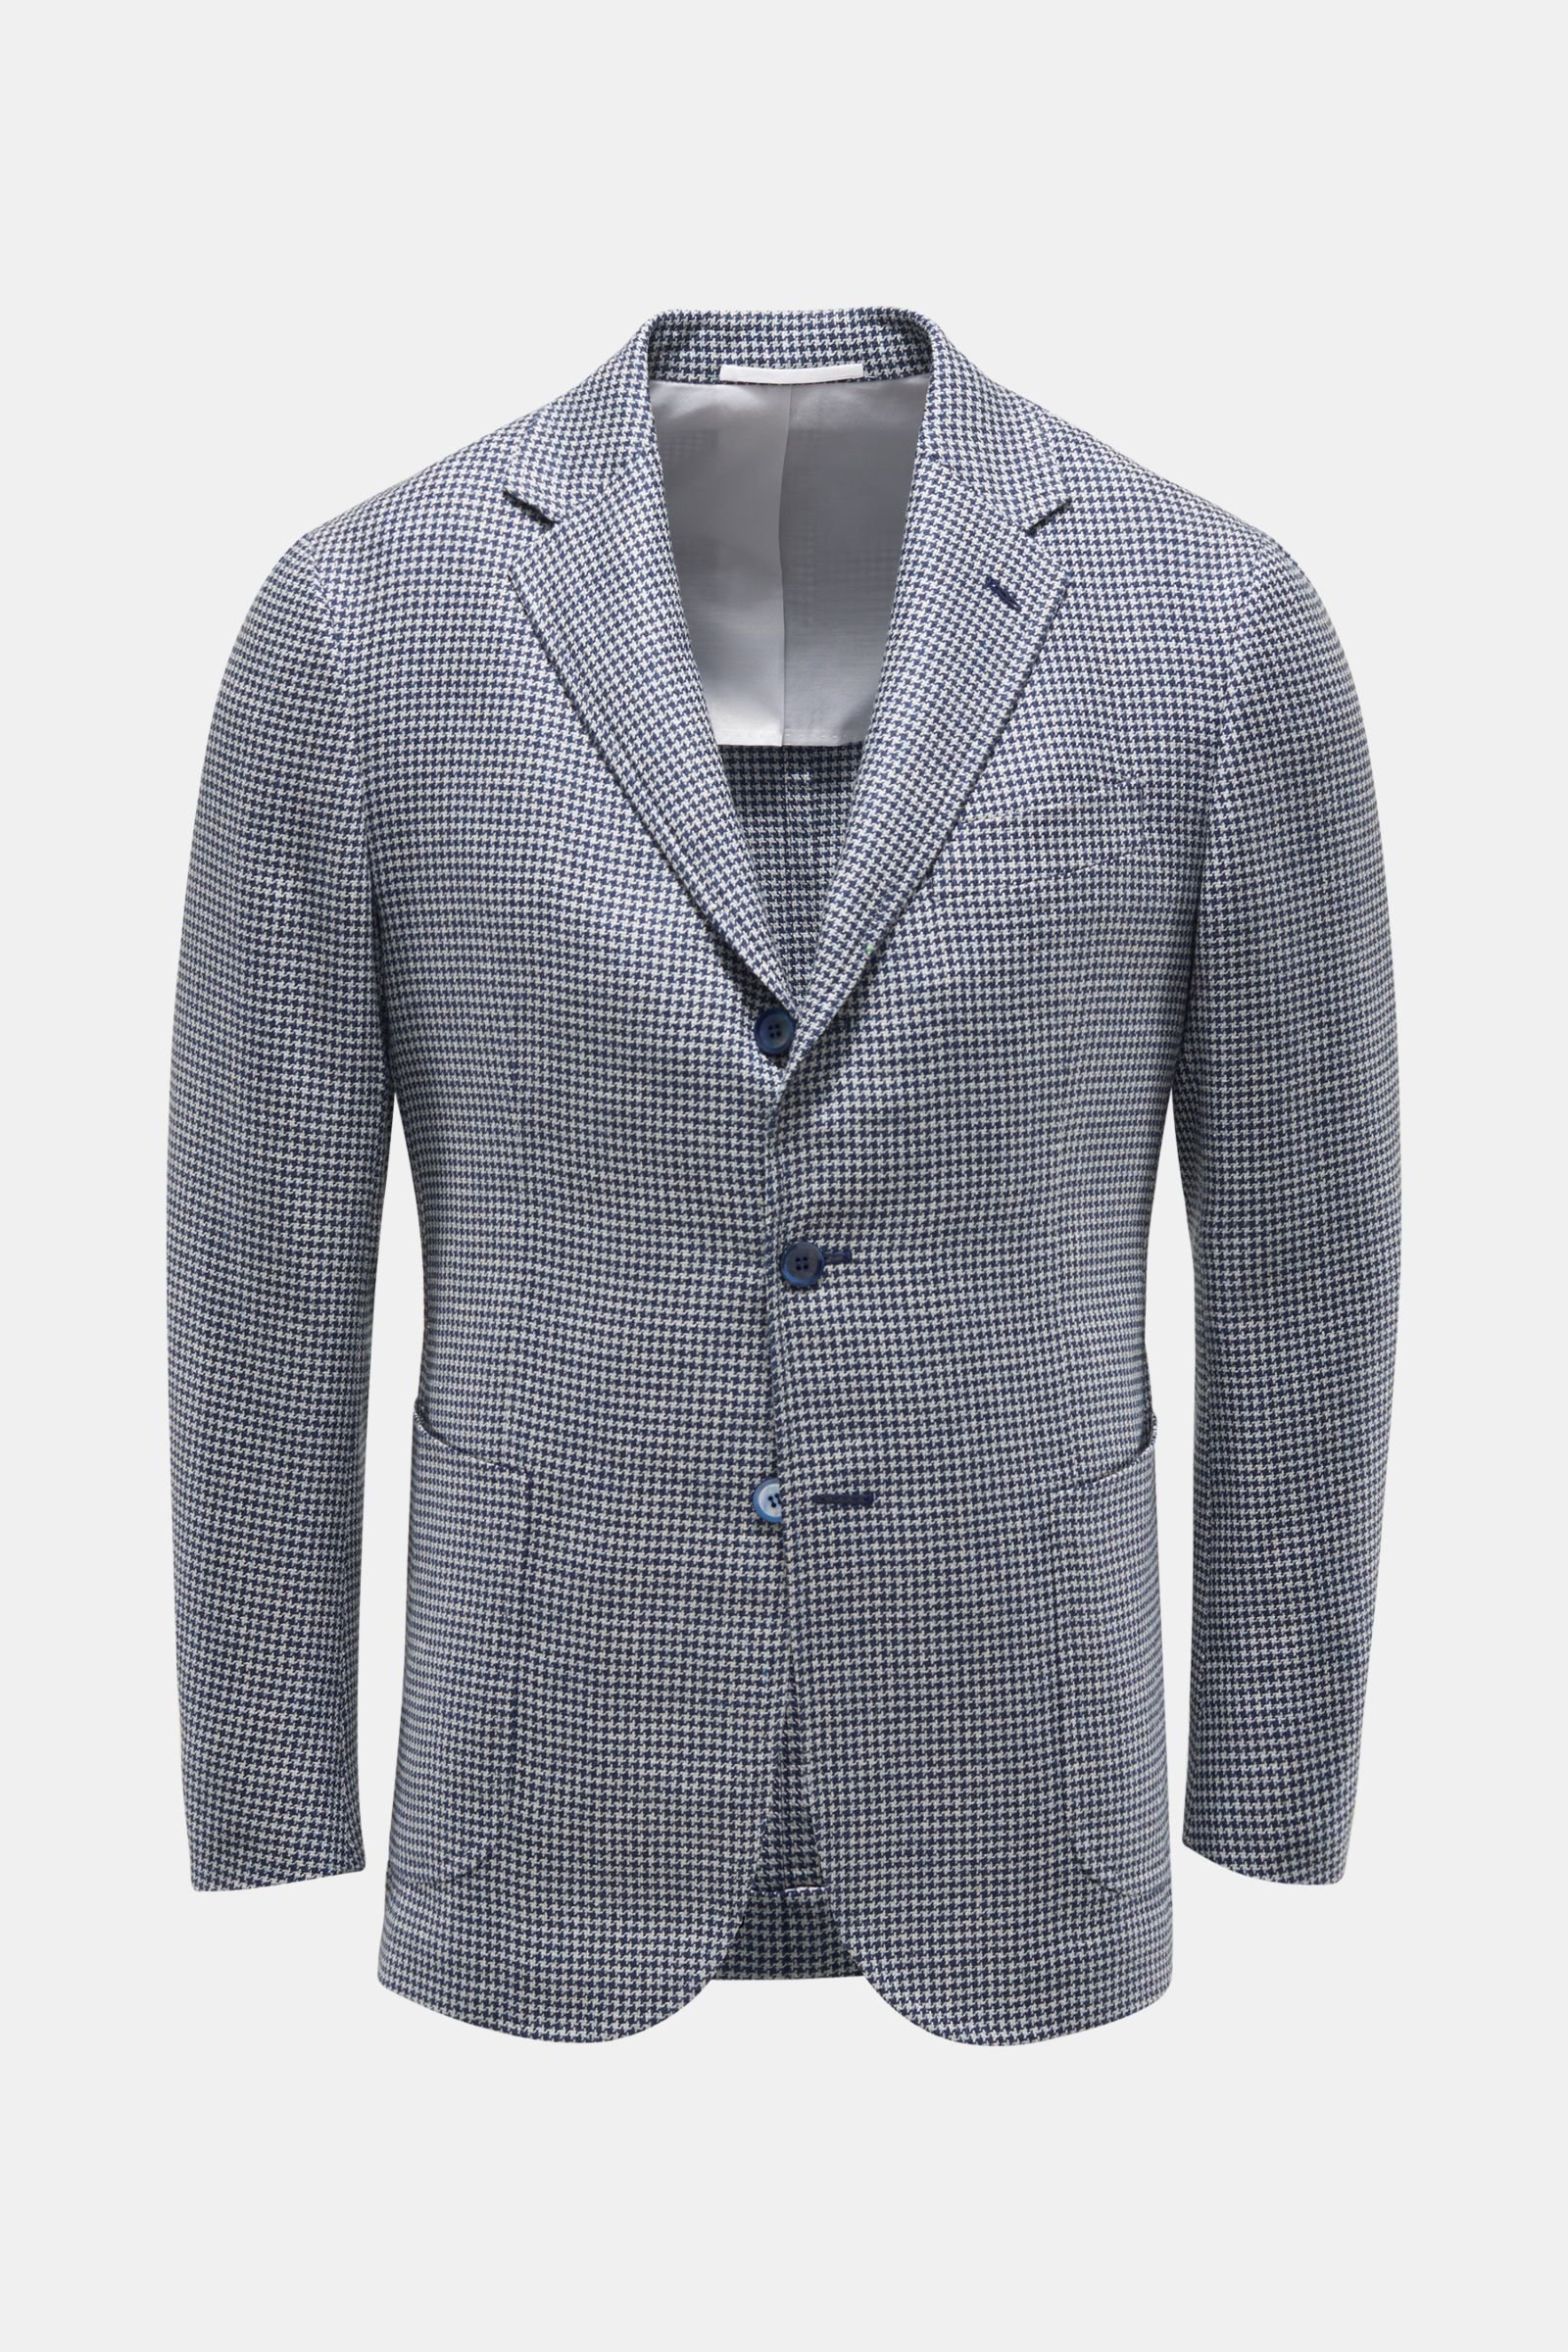 Smart-casual jacket 'Guvincenzo' navy/off-white checked